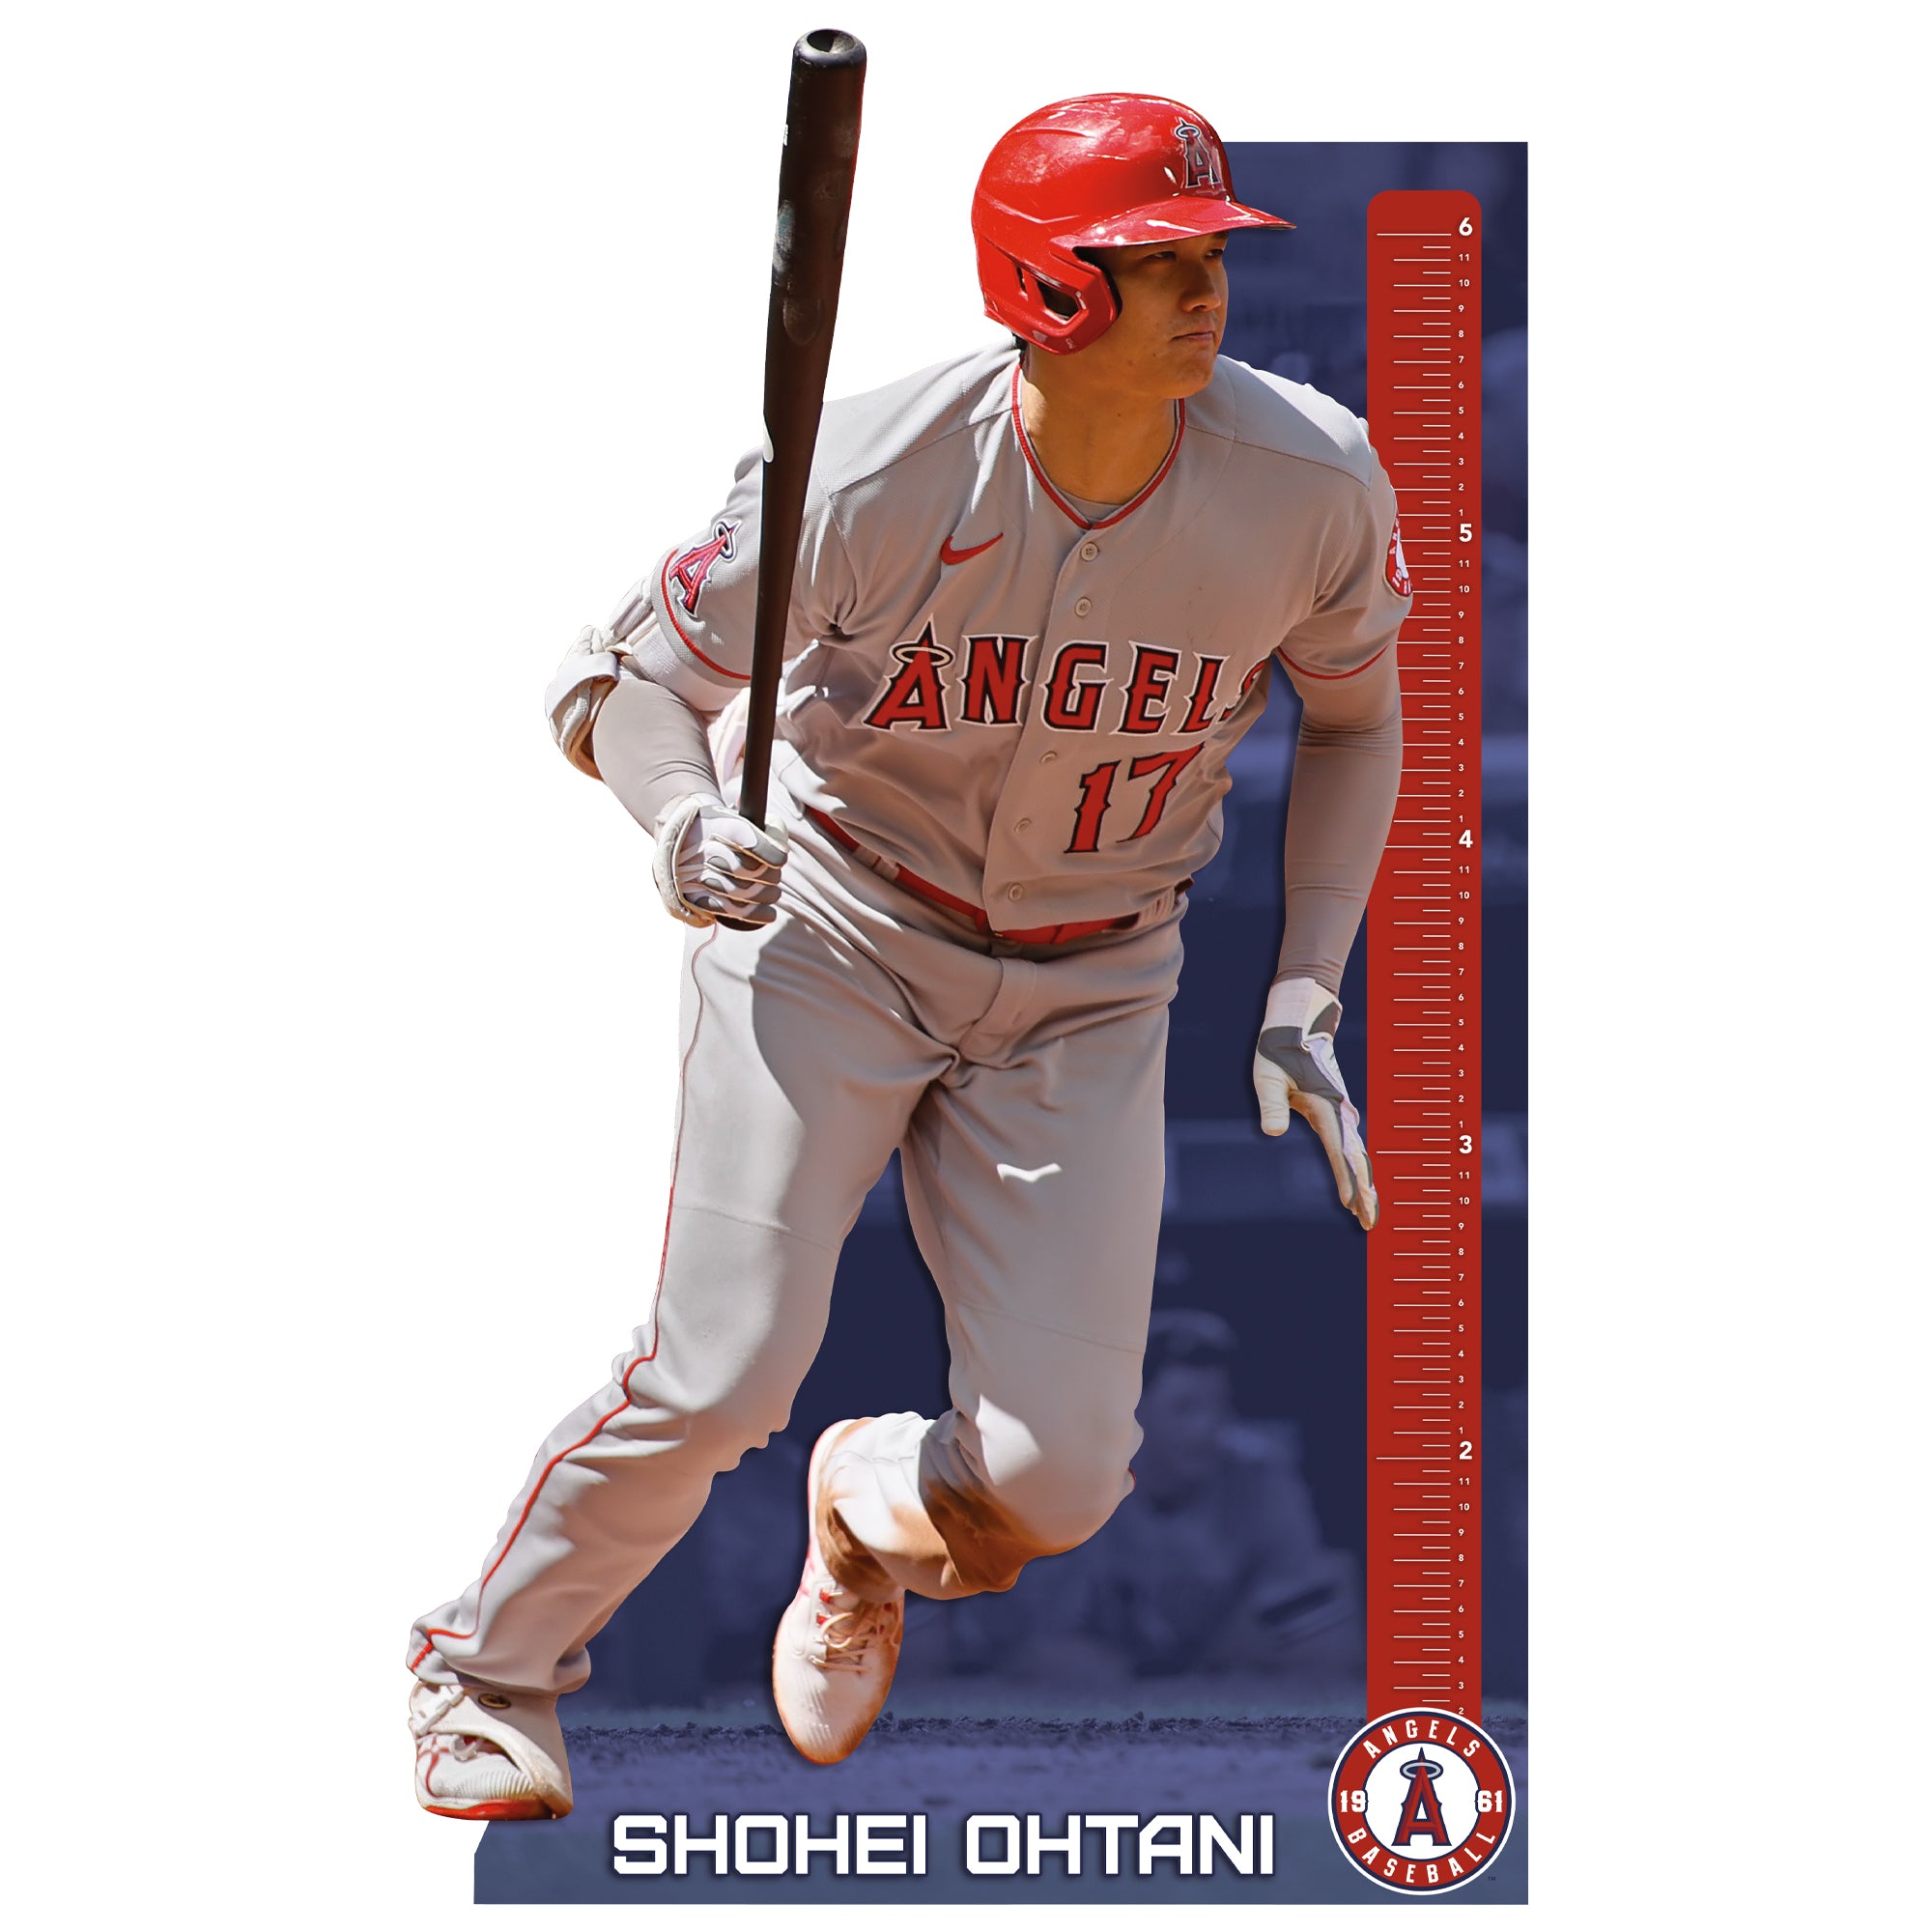 2021 Signed Shohei Ohtani American League MVP Jersey limited edition # 6 of  17